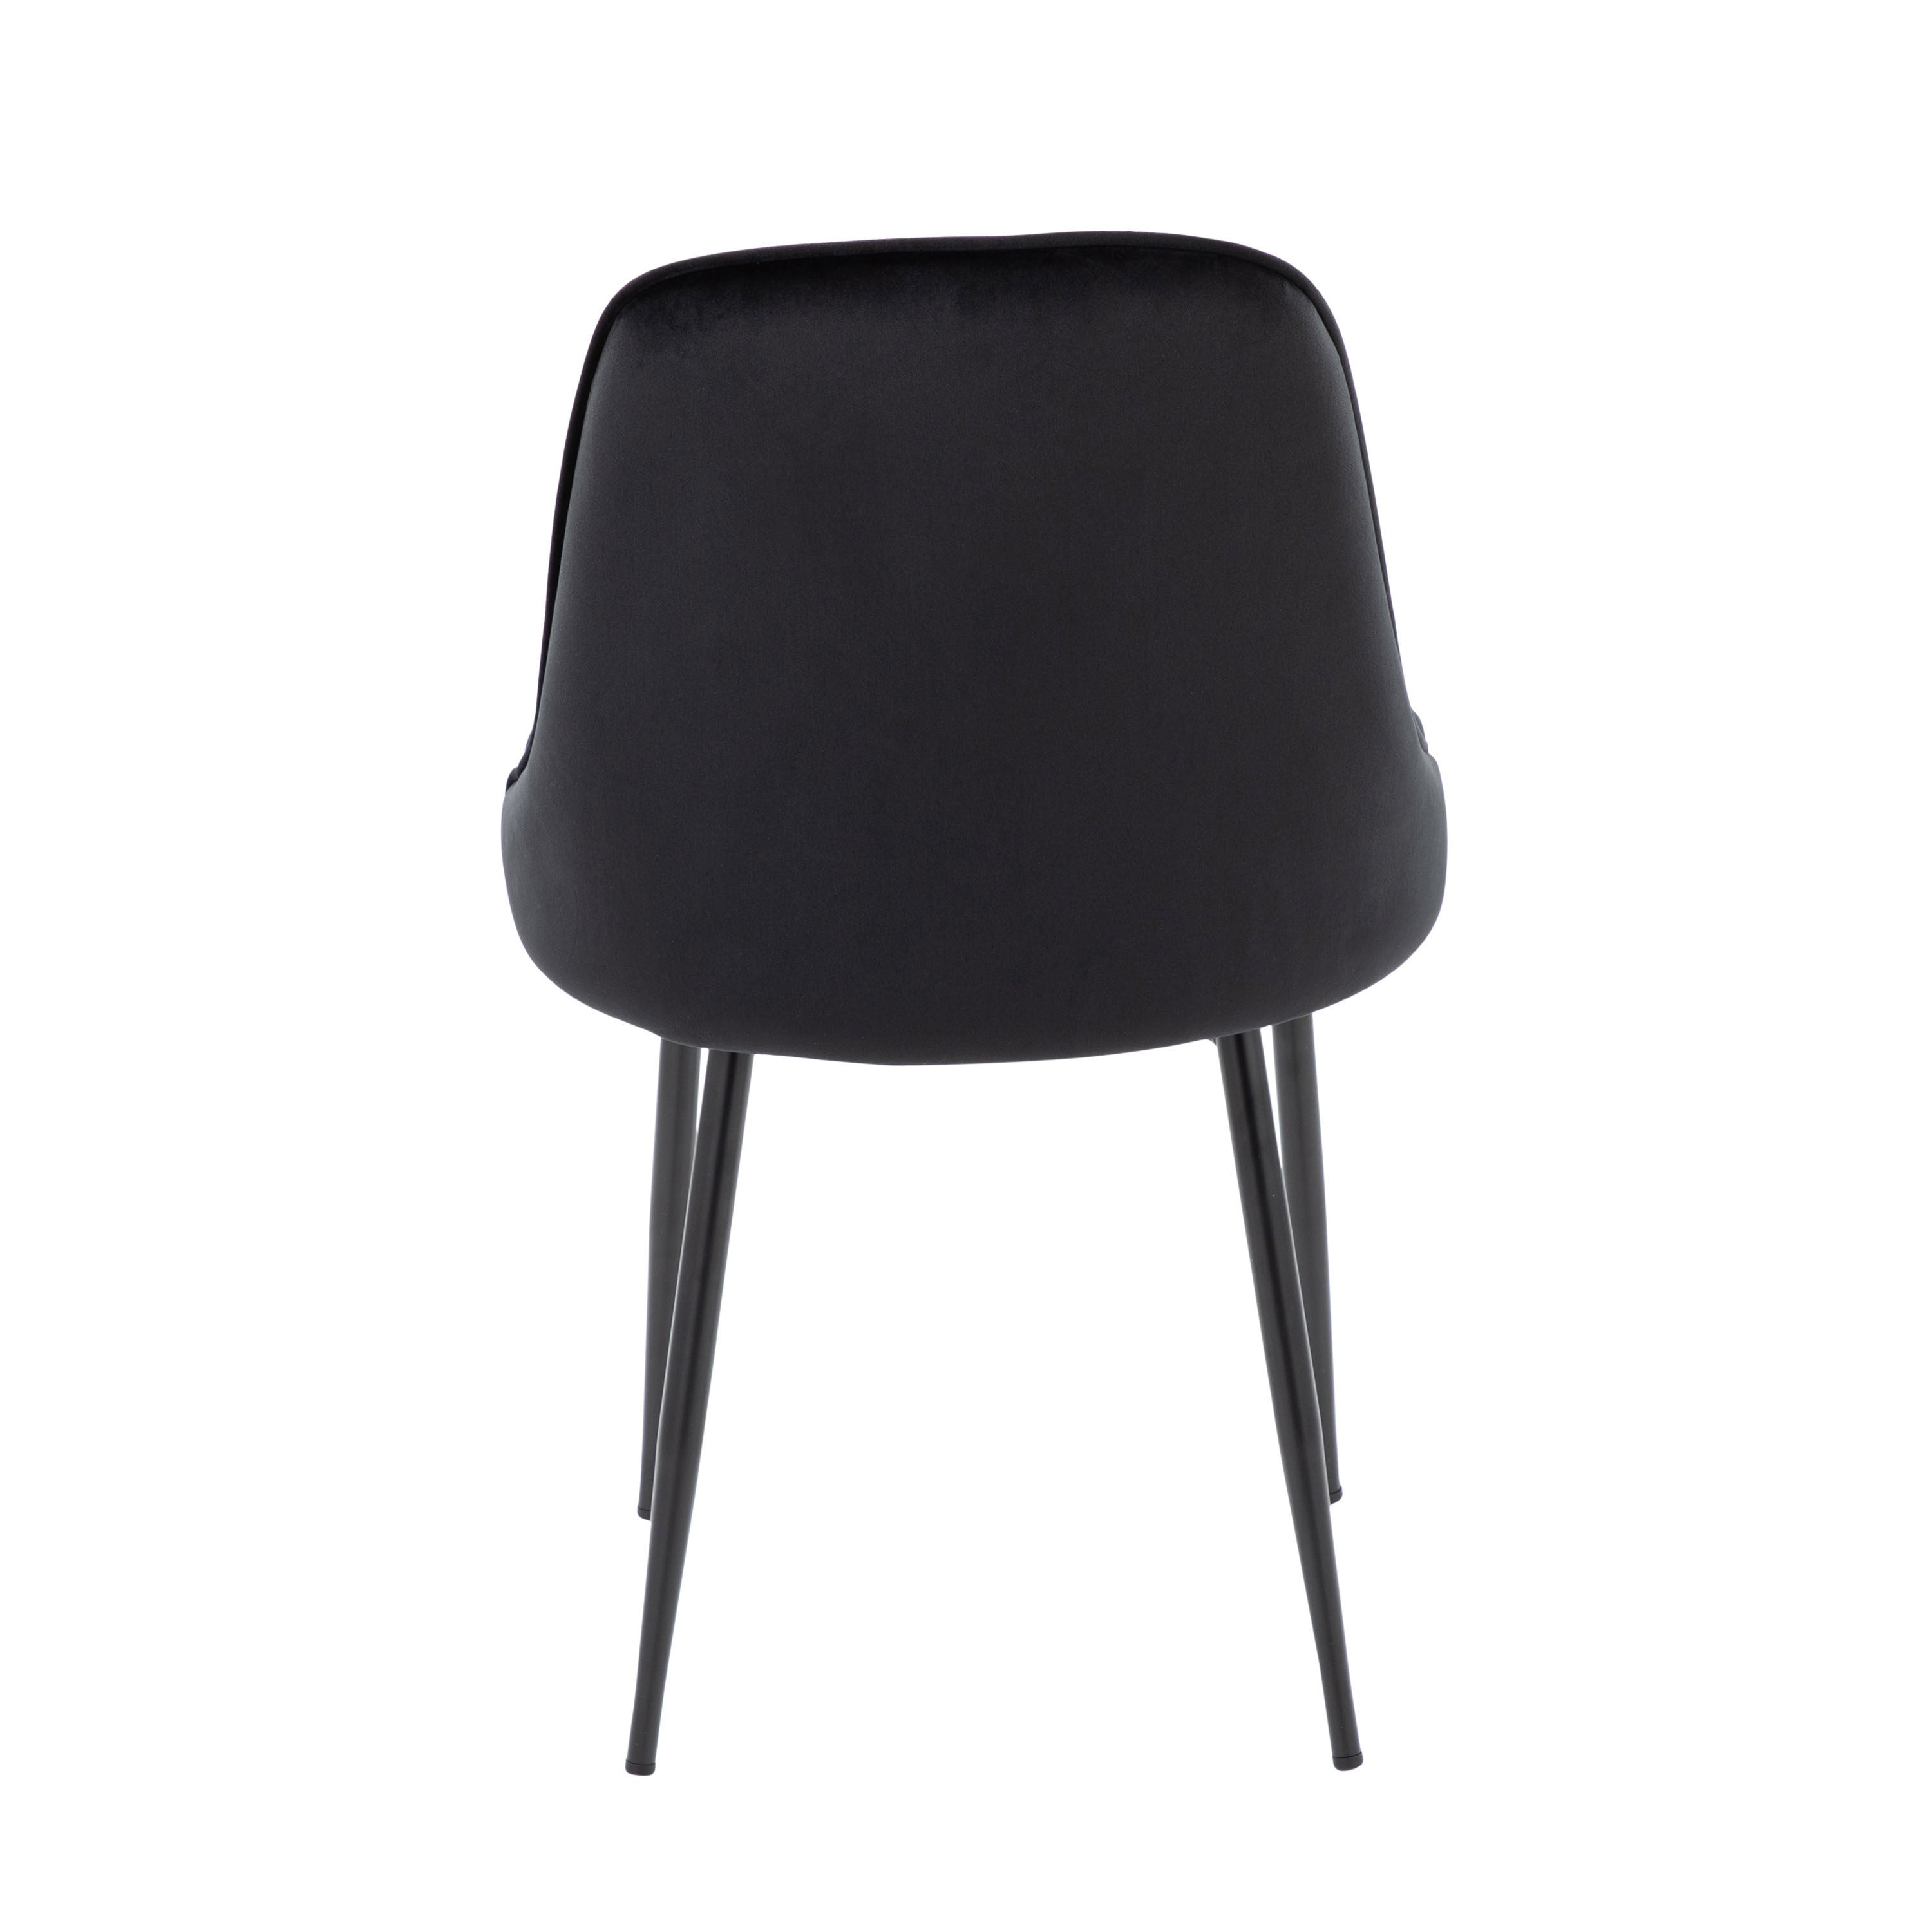 Contemporary Dining Chair with Black Frame and Black Velvet Fabric (Set of 2)